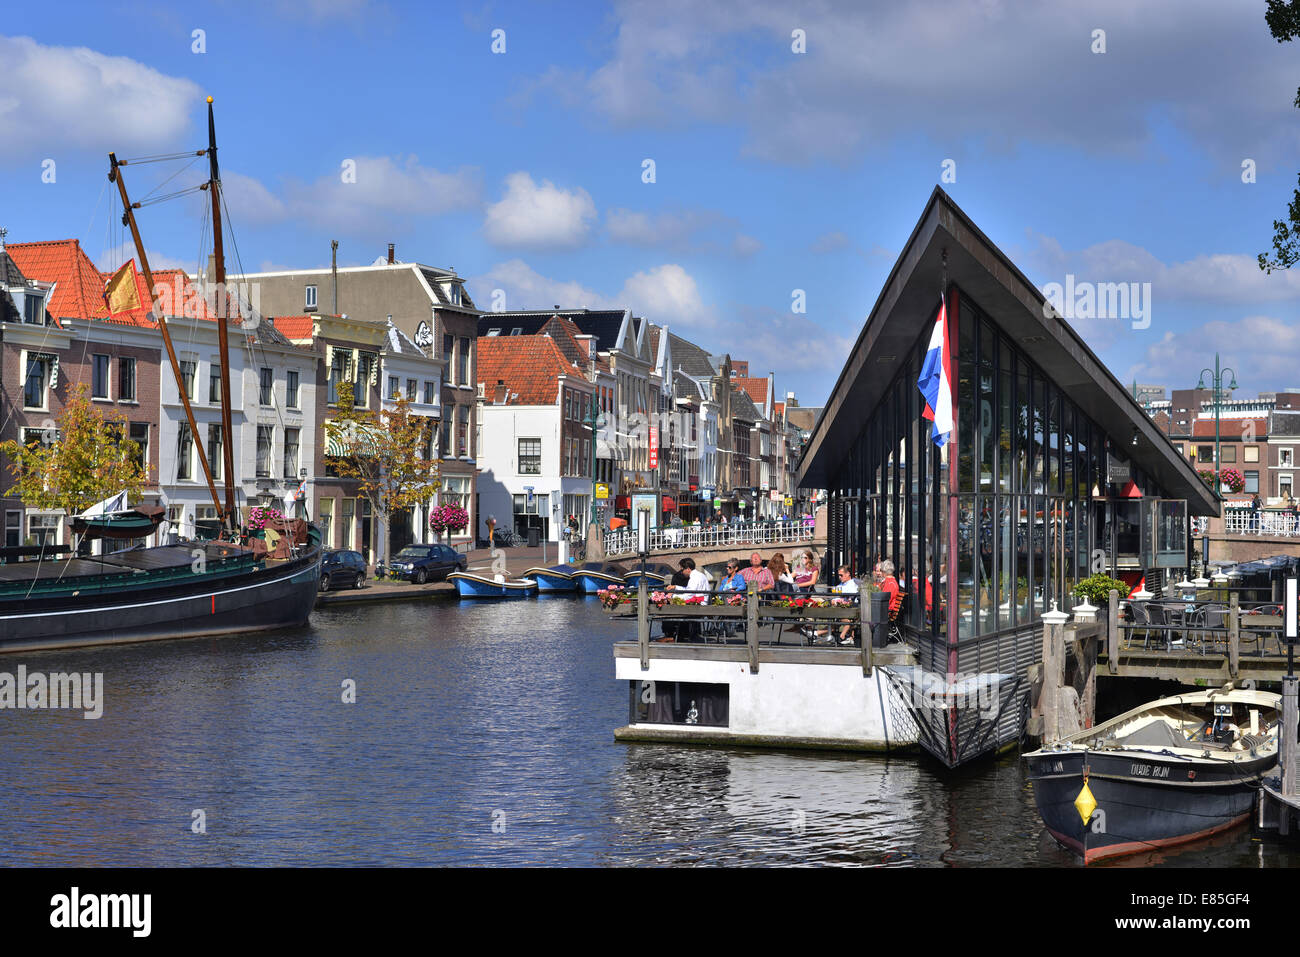 The city of Leiden is the birthplace of Rembrandt, has the oldest university in the Netherlands and is often called the “Venice of the Netherlands”. Photo: September 14, 2014. Stock Photo